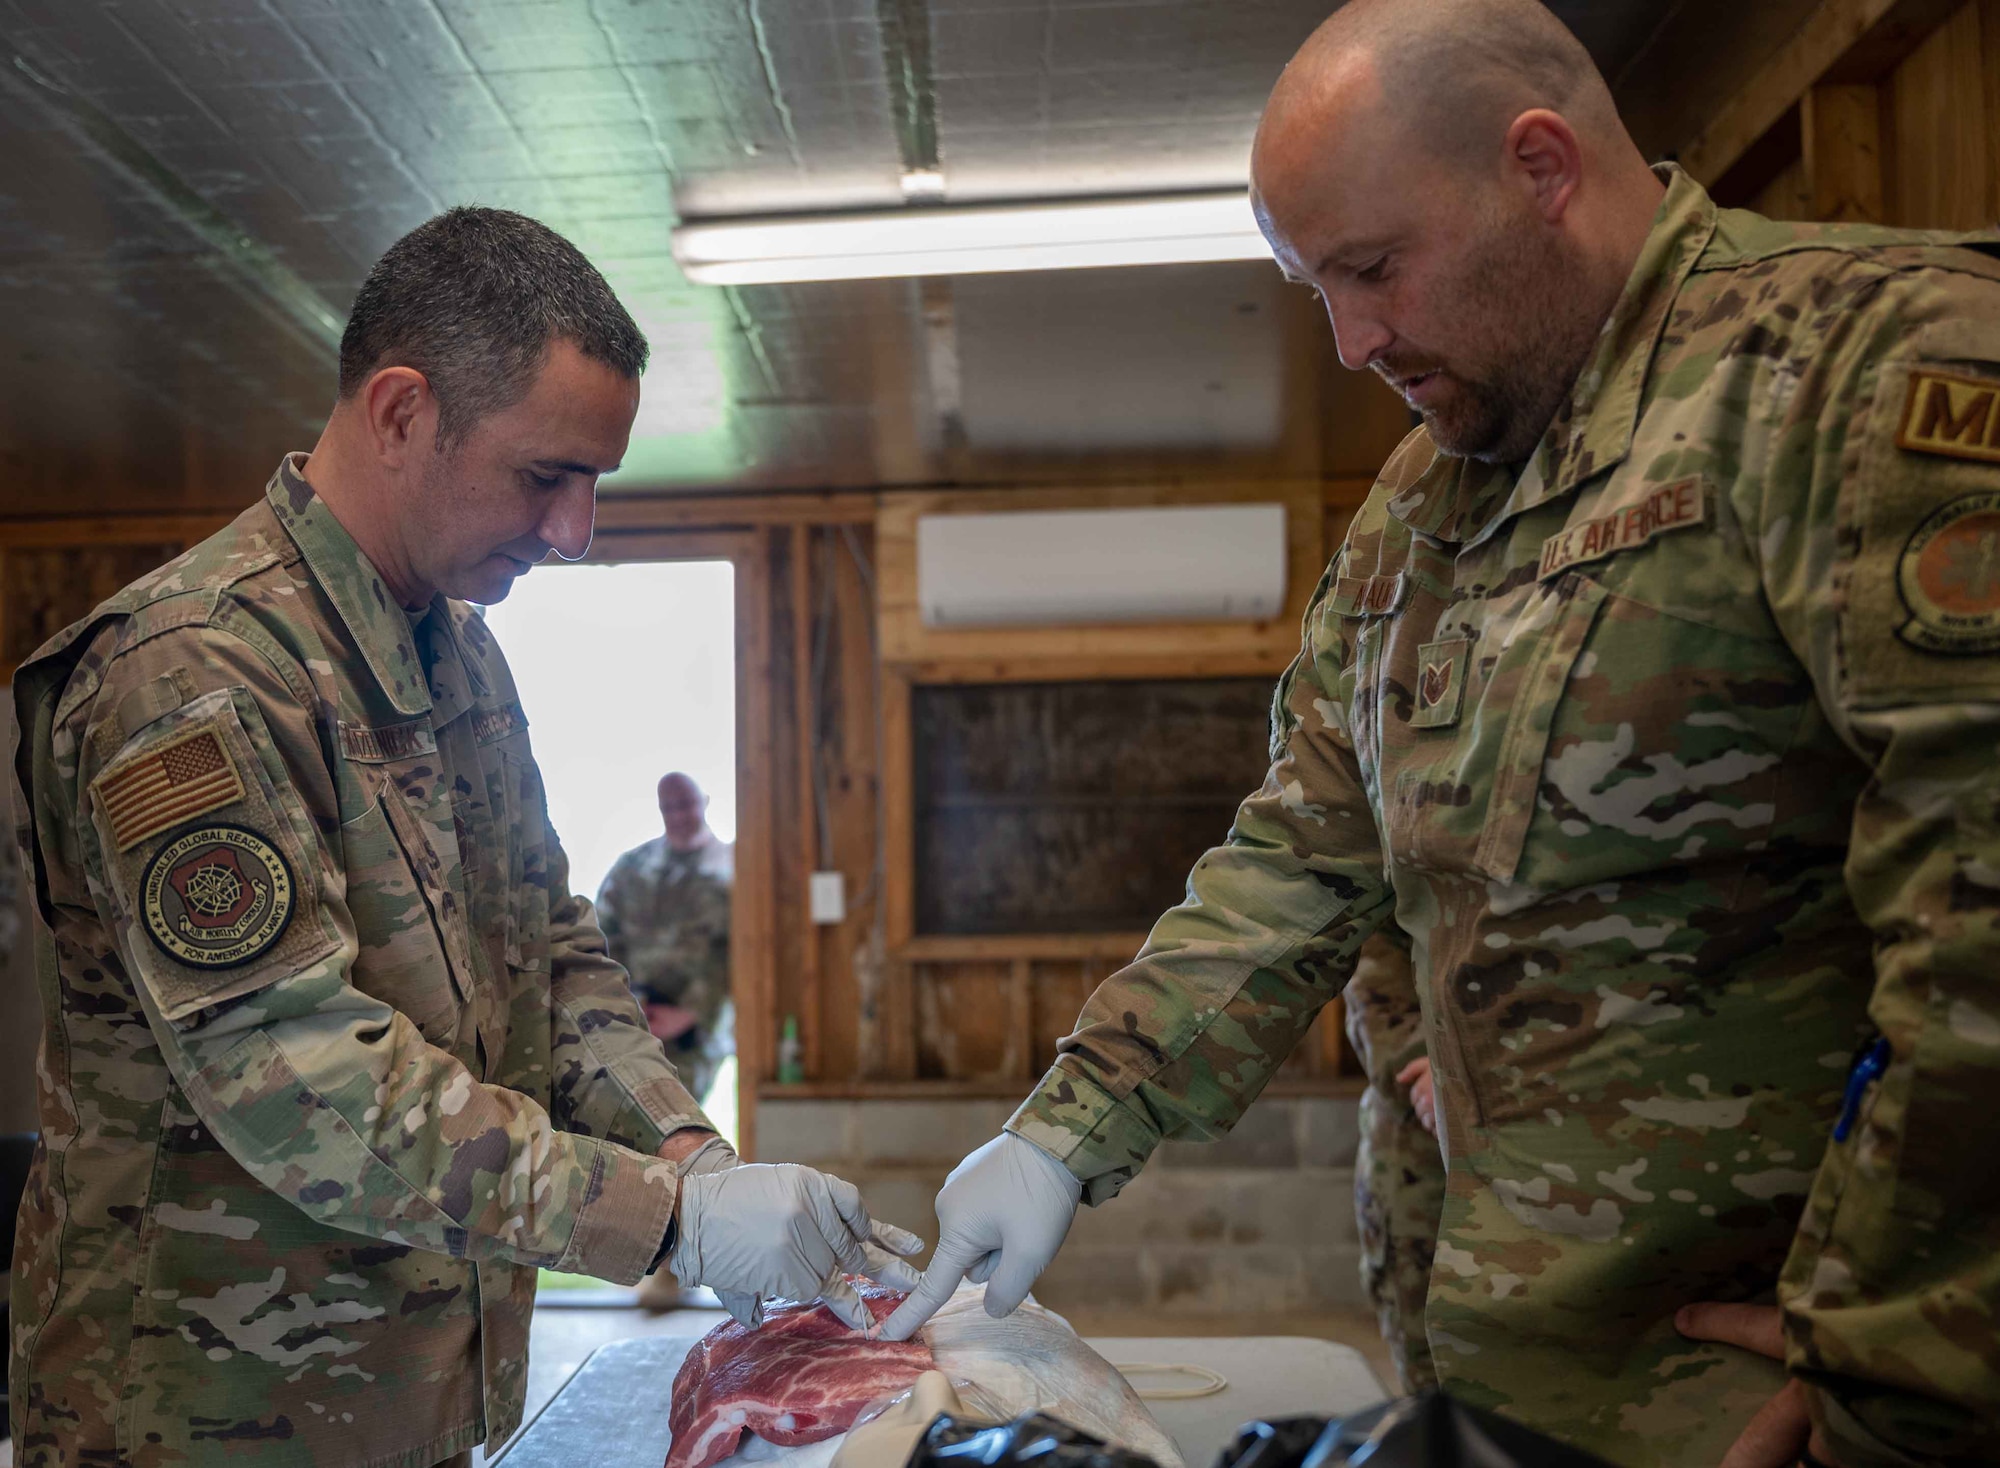 Chief Master Sgt. Brian Kruzelnick, left, Air Mobility Command command chief, practices needle decompression techniques with Tech. Sgt. Brock Ashbaugh, 436th Medical Group tactical combat casualty care instructor, at Dover Air Force Base, Delaware, May 5, 2022. During the visit, Kruzelnick and Gen. Mike Minihan, AMC commander, highlighted top performing Airmen and visited base facilities such as the C-5 isochronal dock, the air traffic control tower and the Tactics and Leadership Nexus complex. (U.S. Air Force photo by Senior Airman Faith Schaefer)